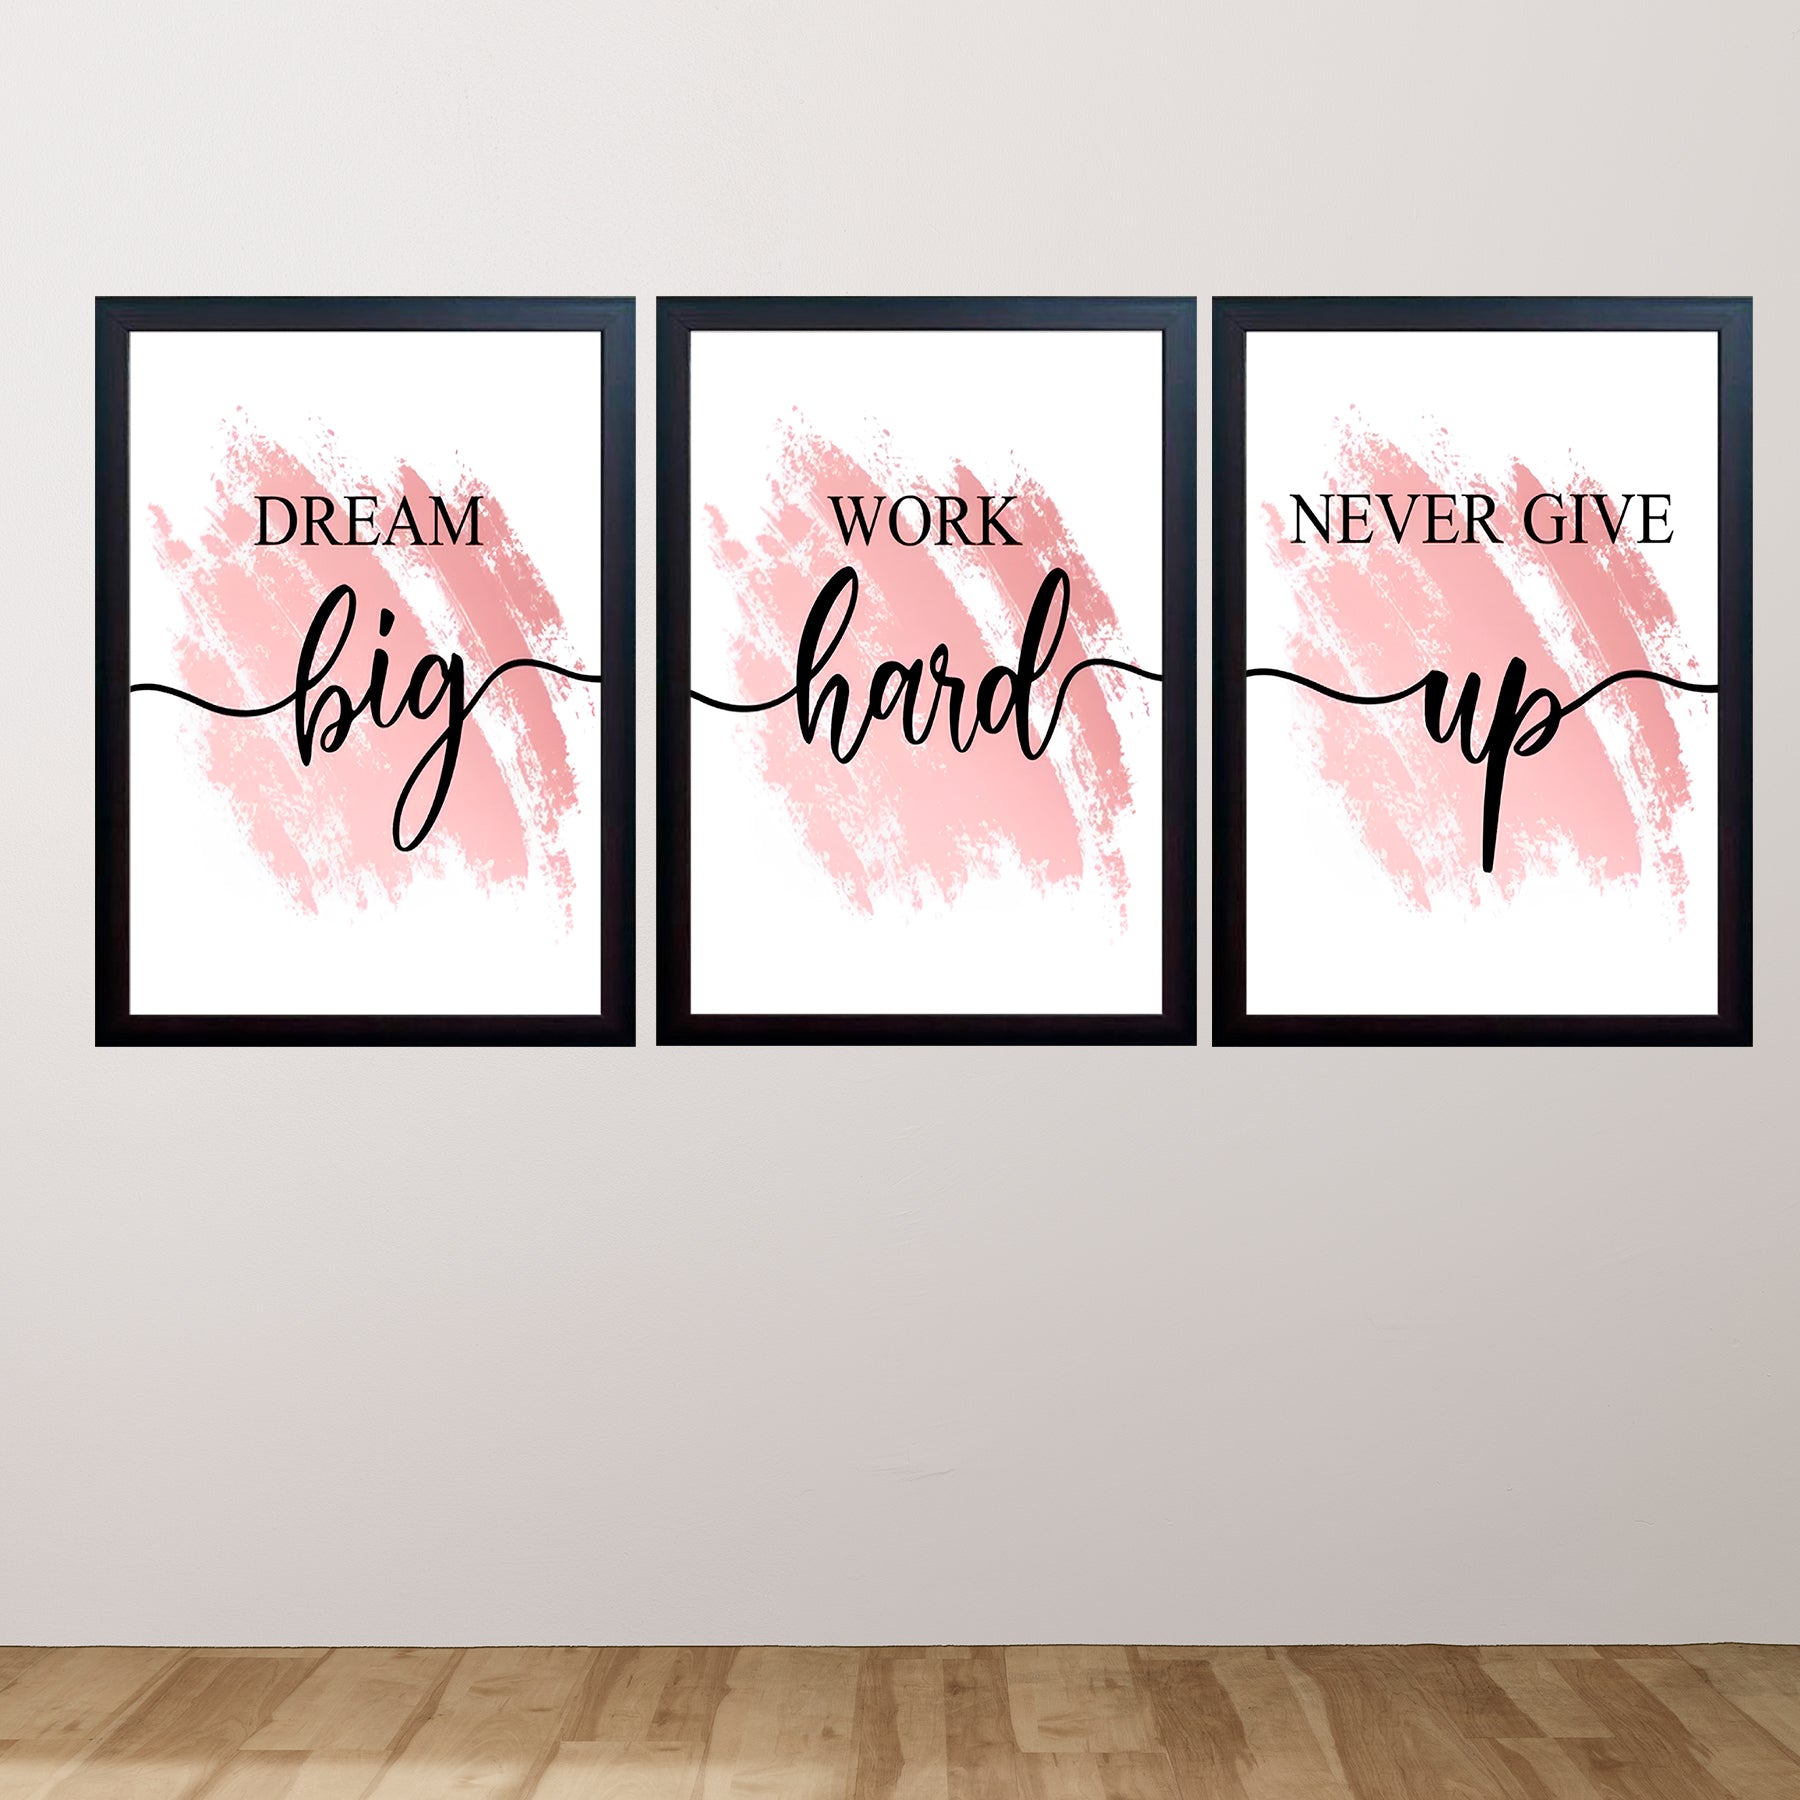 Motivational Quotes About Success For House & Office Decor Set of 3 Frames